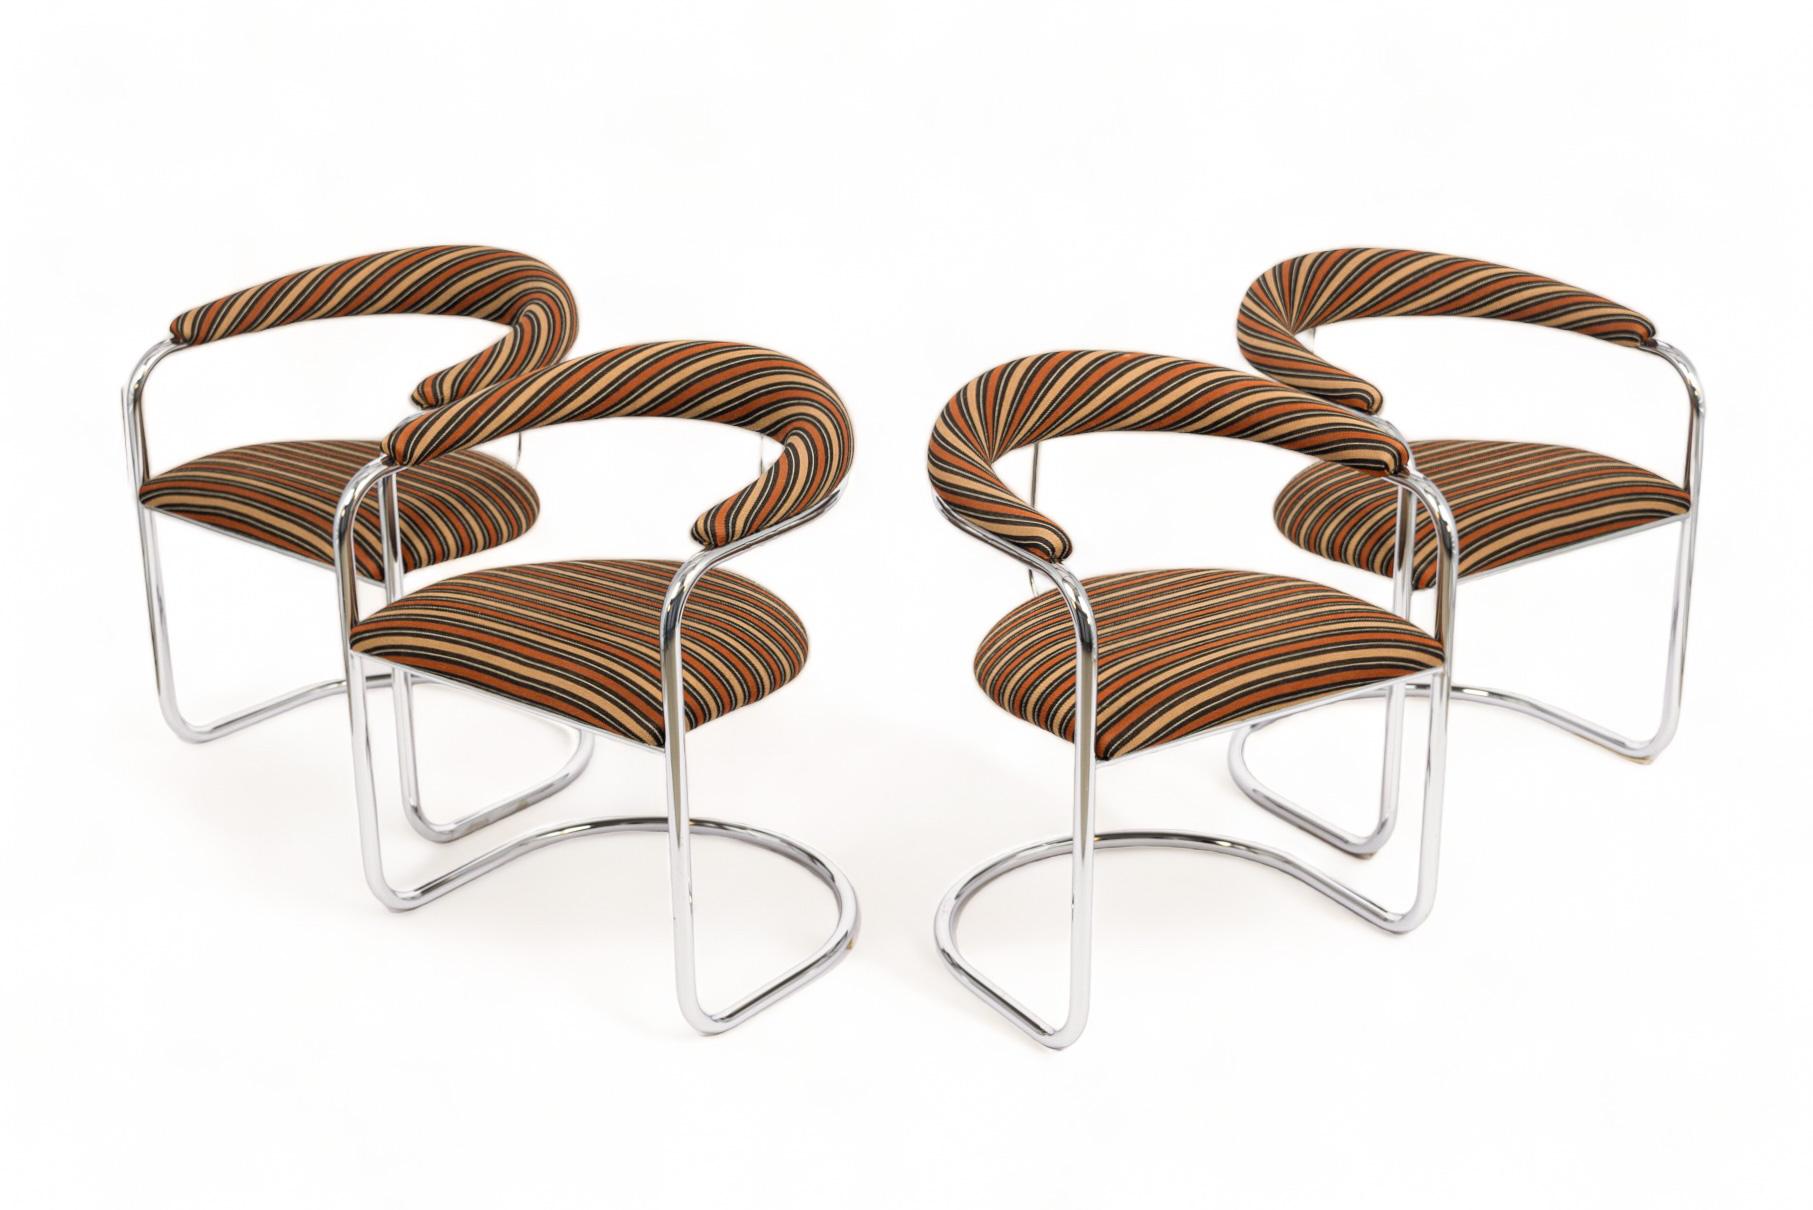 LISTING IS FOR 2 CHAIRS ONLY

This set of four vintage mid century modern SS33 dining chairs were designed by Anton Lorenz and manufactured by Thonet. These iconic Bauhaus arm chairs feature chrome-plated tubular steel cantilevered frames with